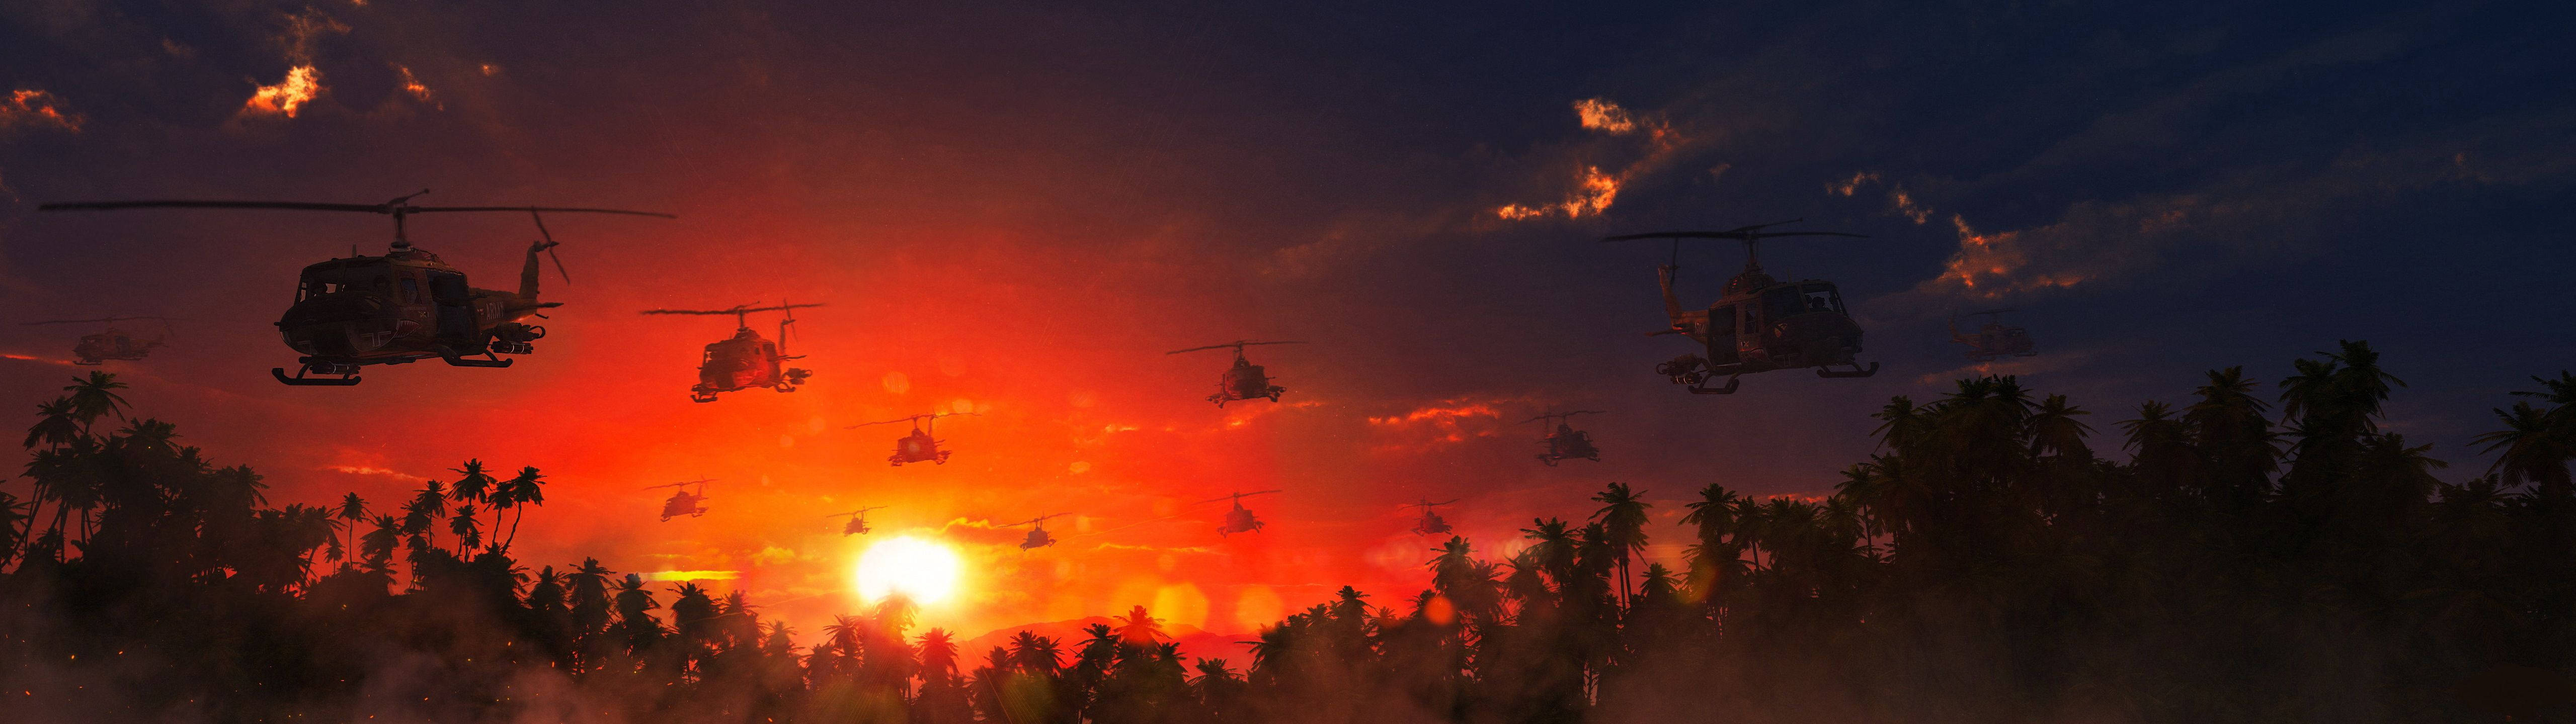 Helicopters In Sunset Wallpaper